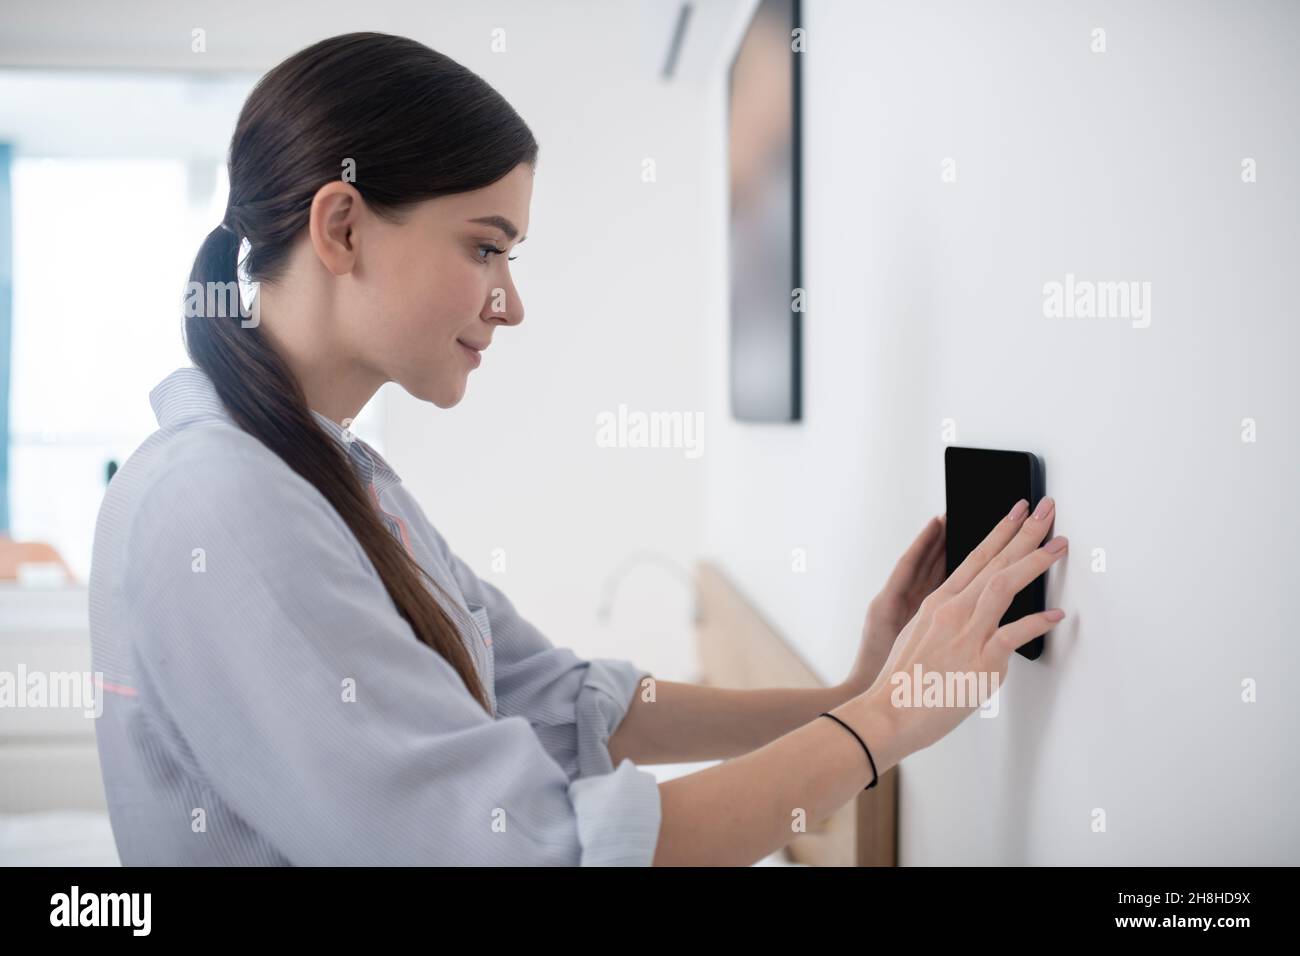 Focused calm dark-haired lady mounting a gadget Stock Photo